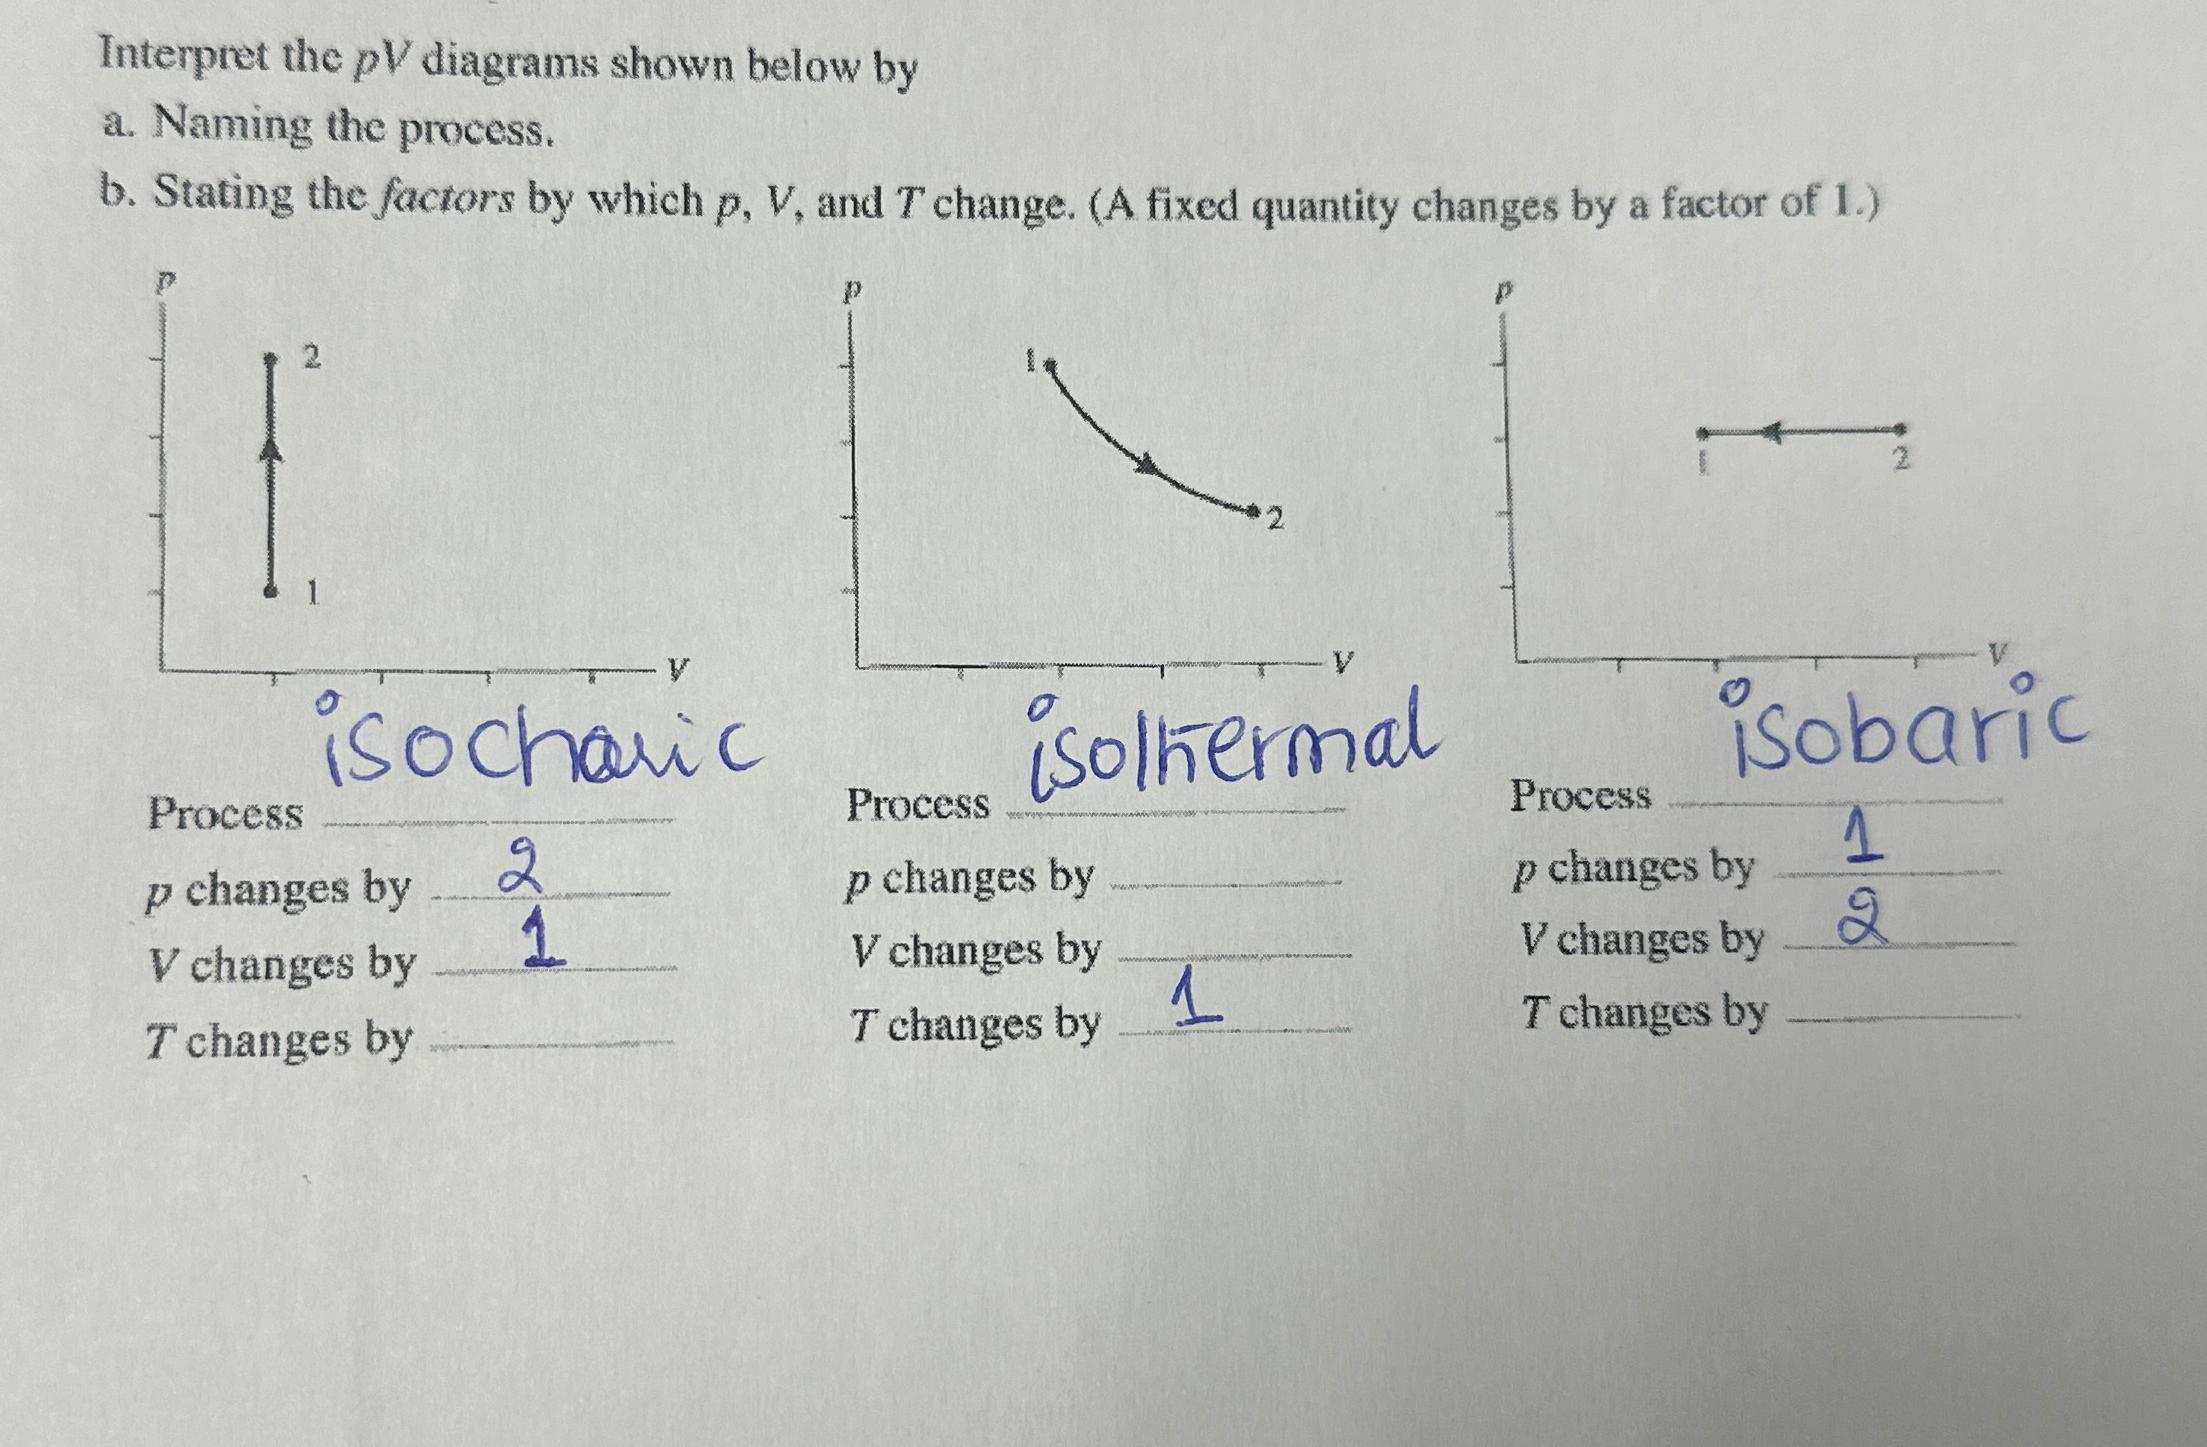 Interpret the pV diagrams shown below by a. Naming the process. b. Stating the factors by which p, V, and T